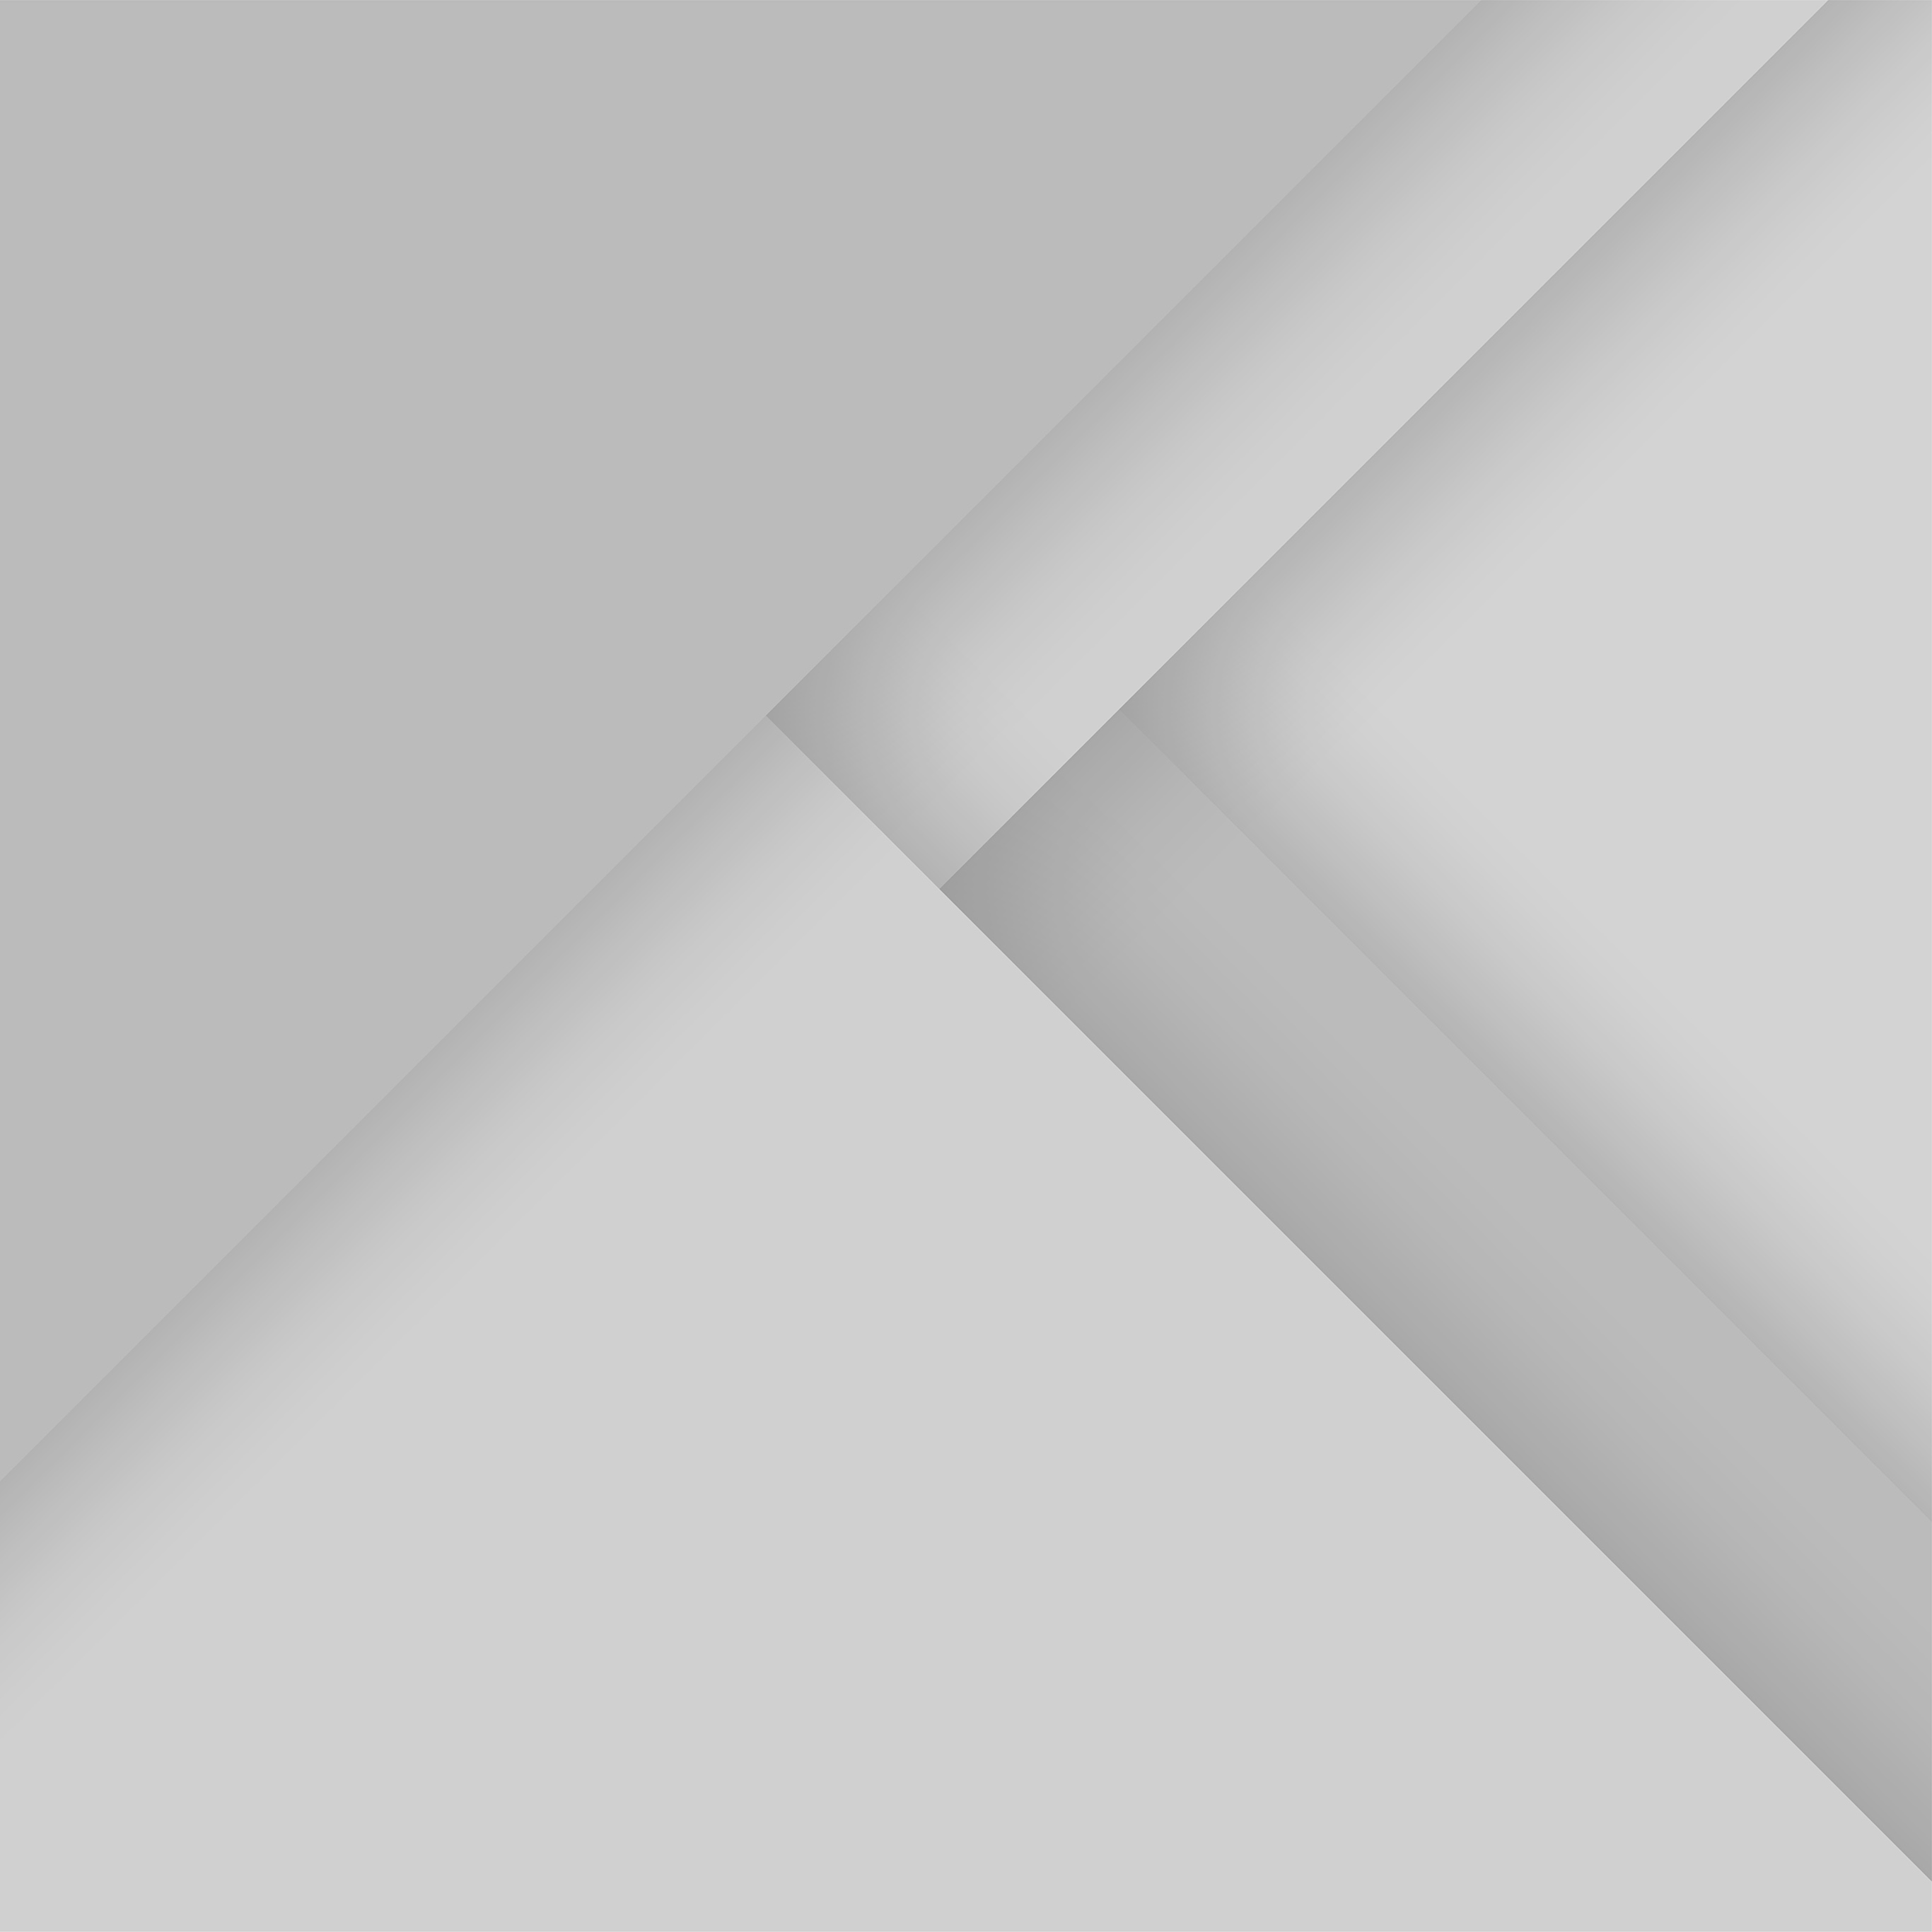 White Material Android Wallpaper Hd - 2732x2732 Wallpaper 